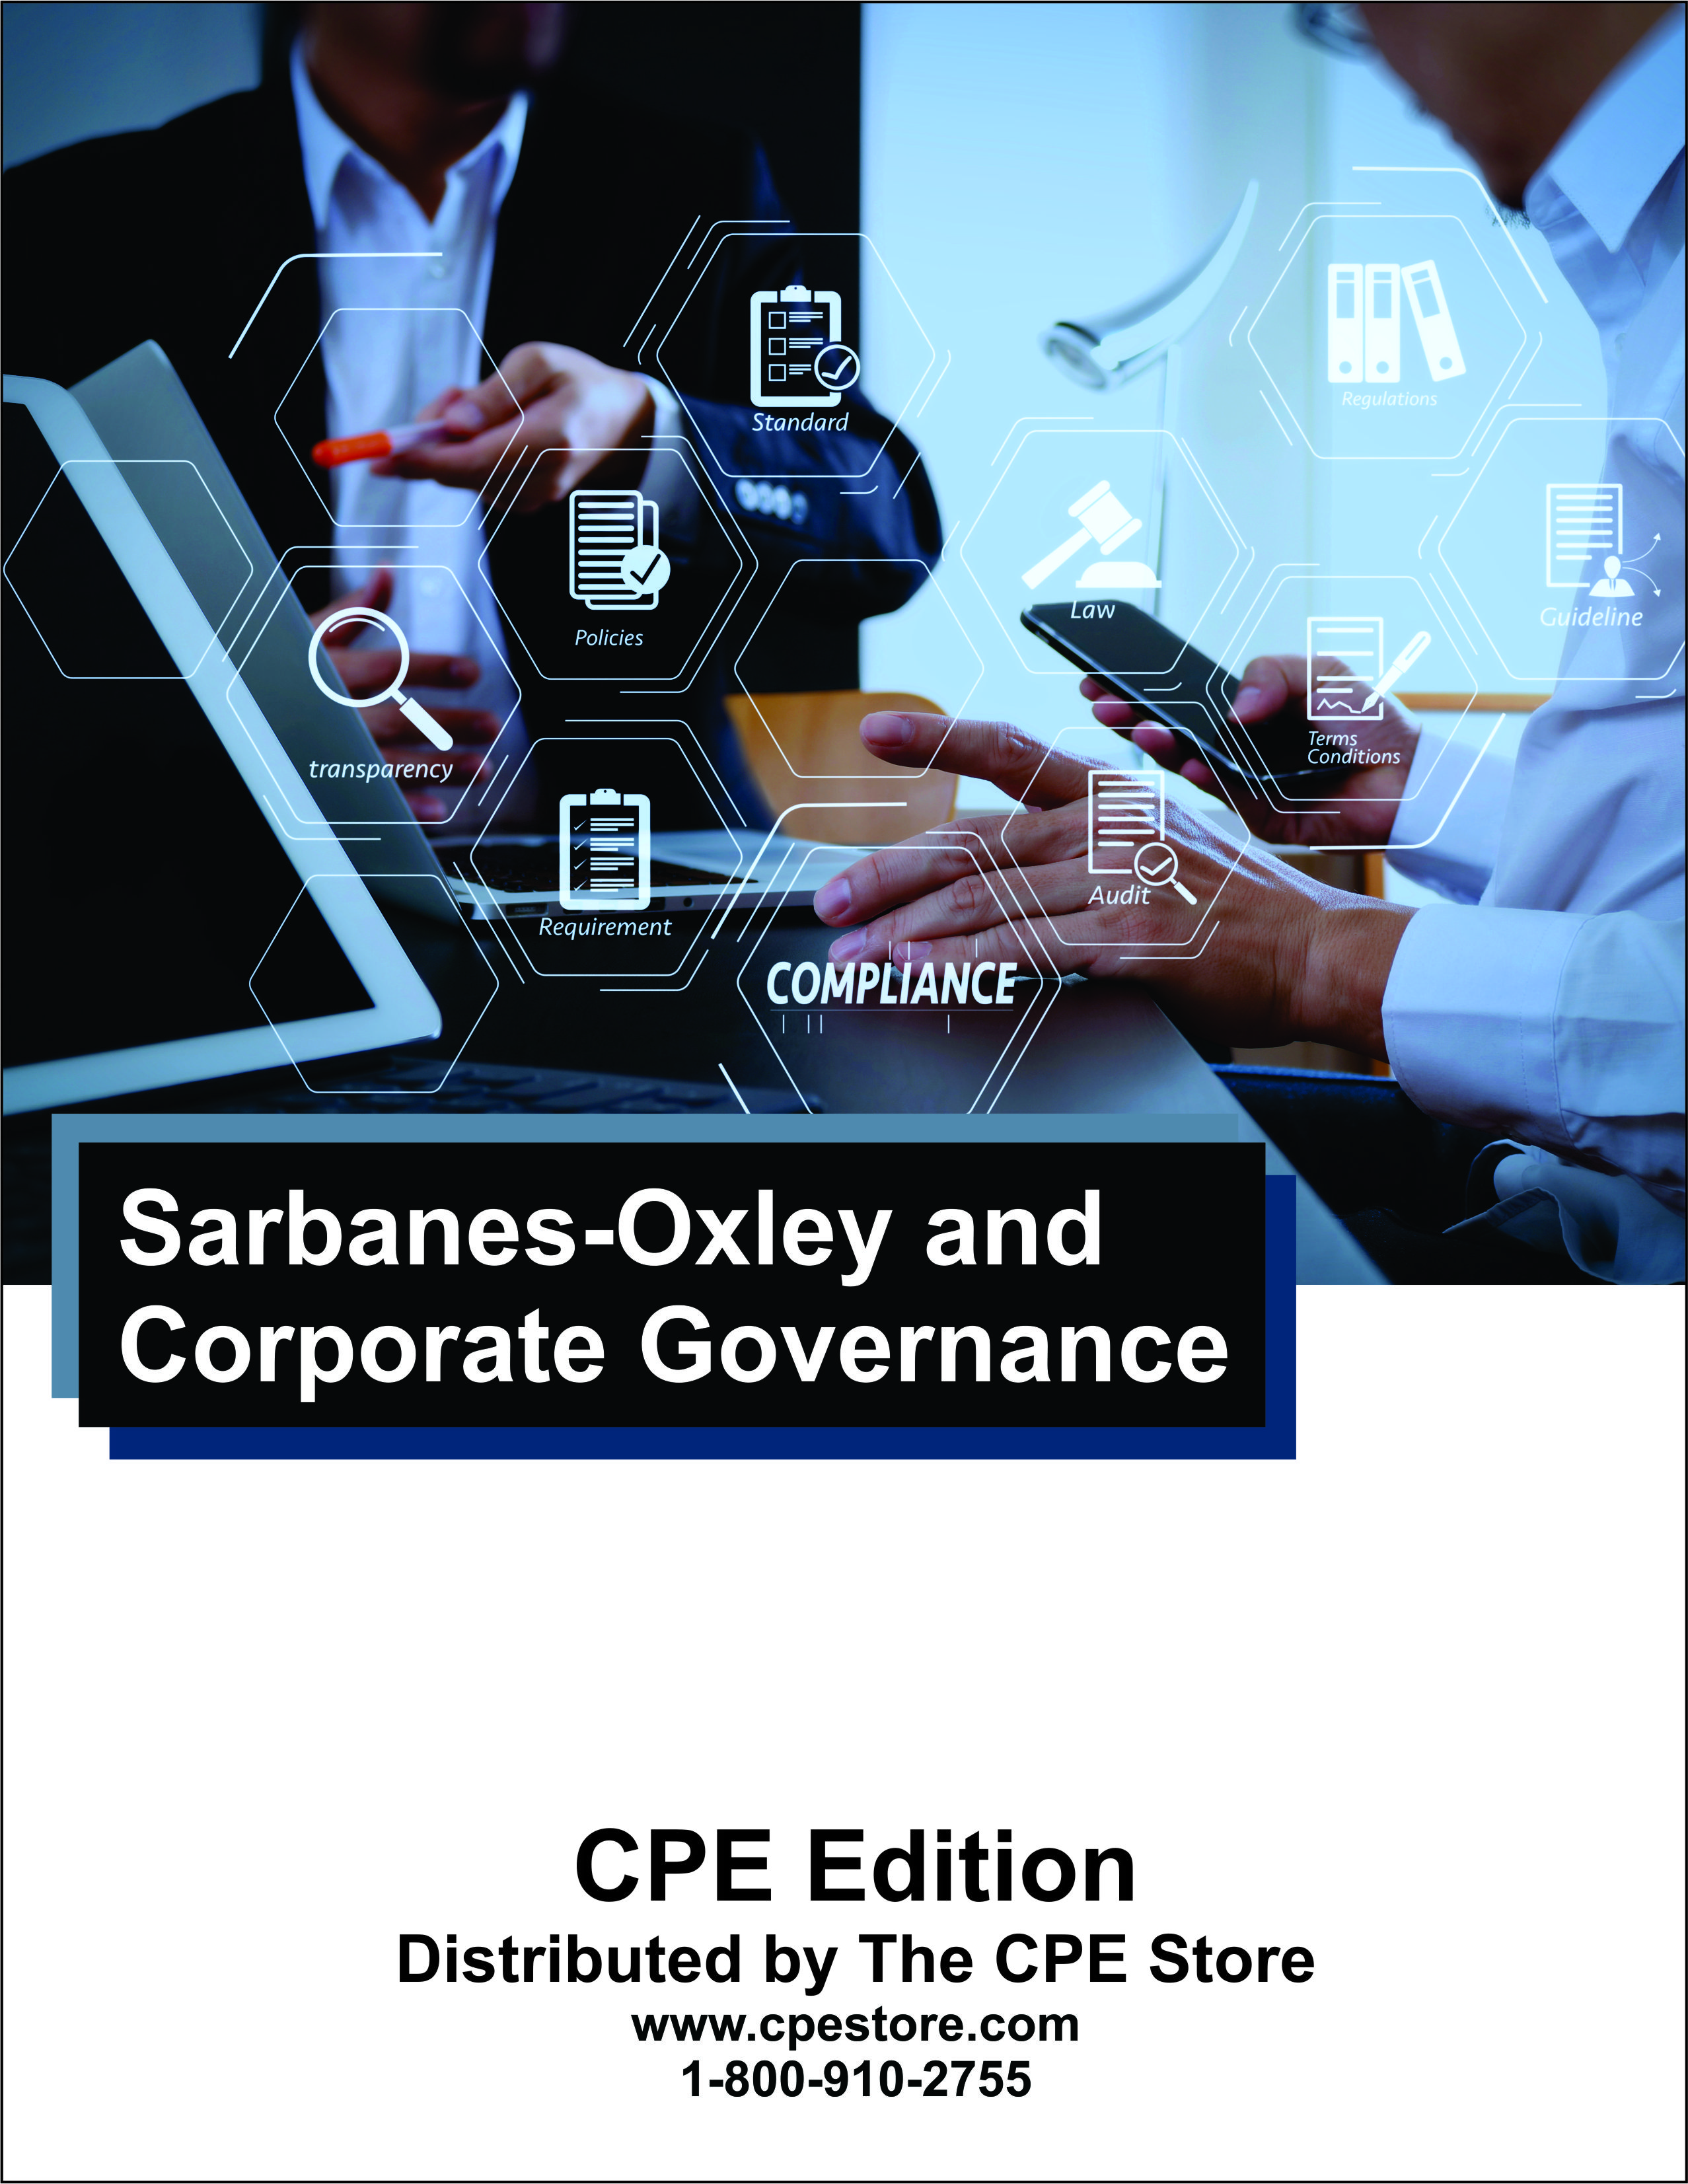 Sarbanes-Oxley and Corporate Governance